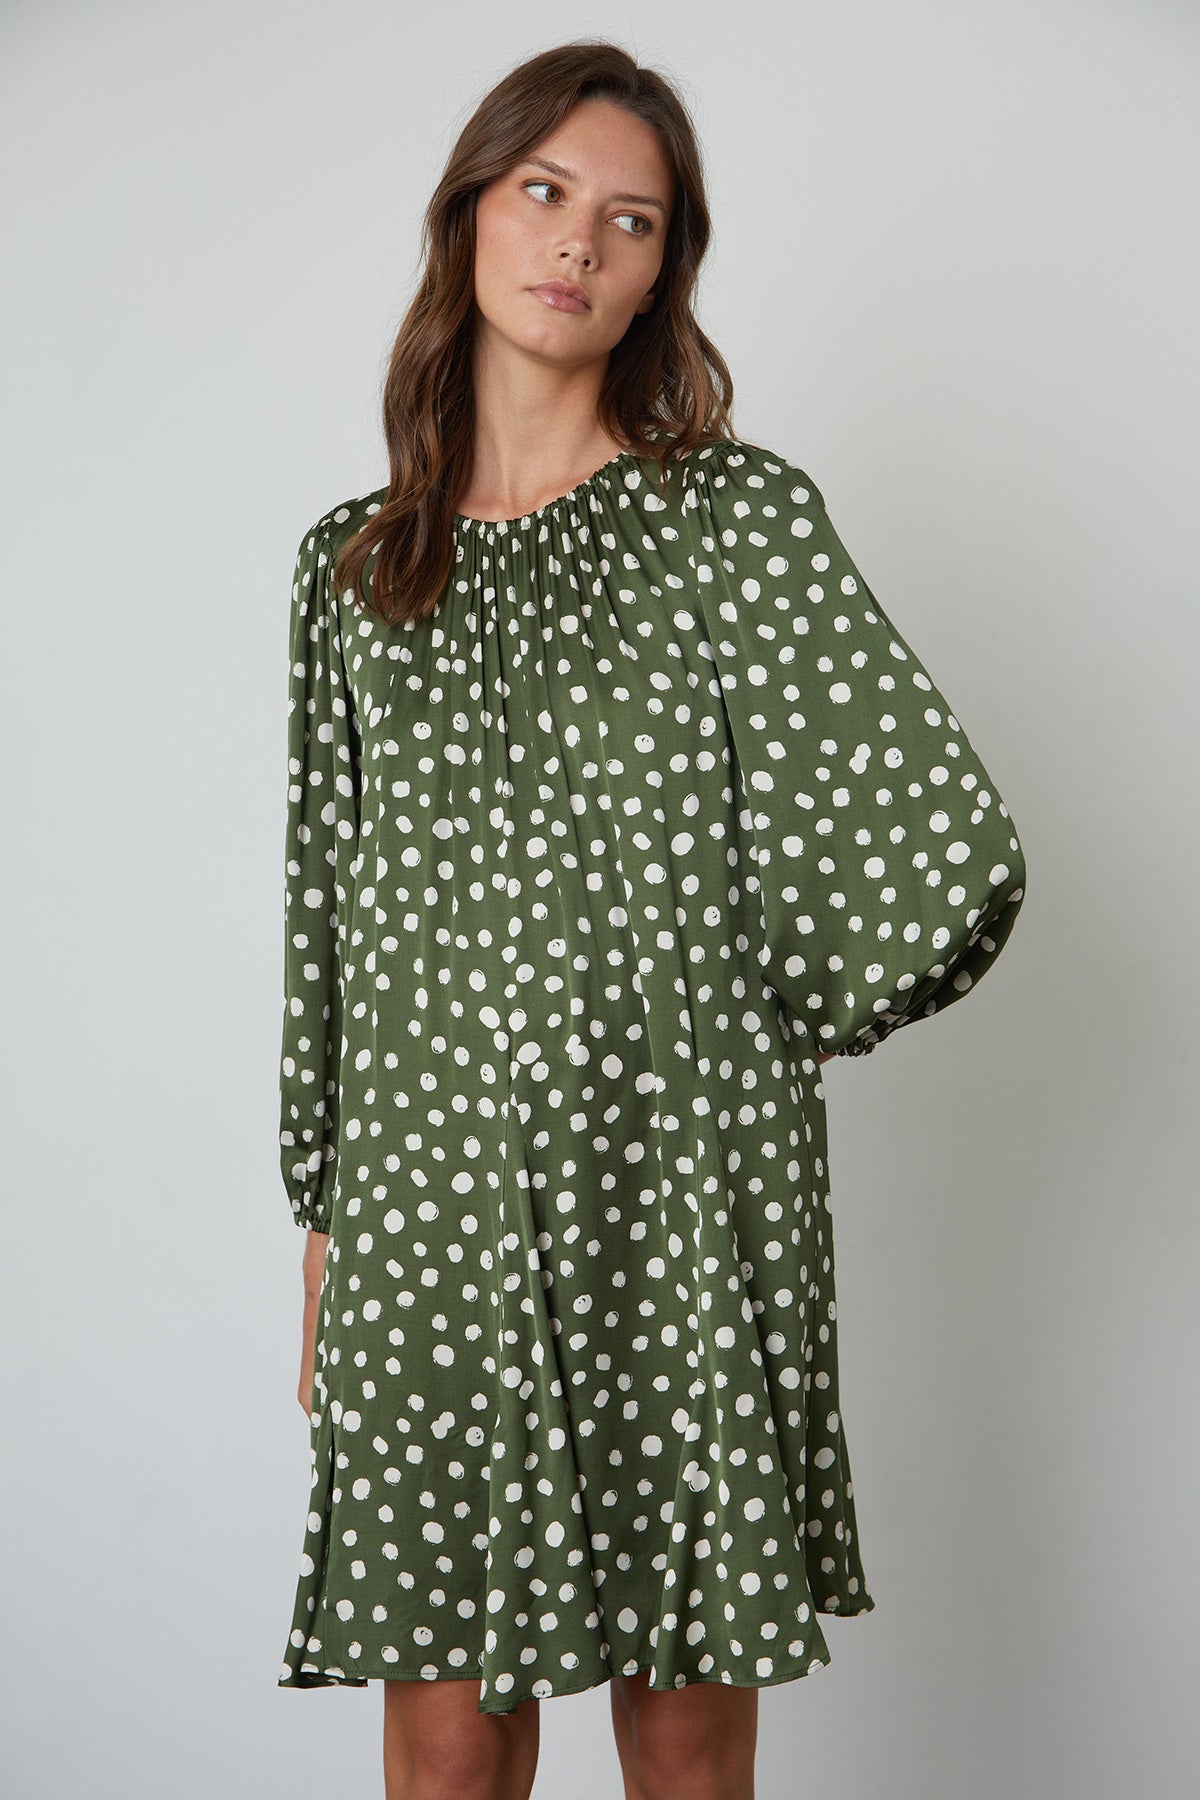 Kenia Polka Dot Dress with Green Background and Cream Dots Front-25078342058177